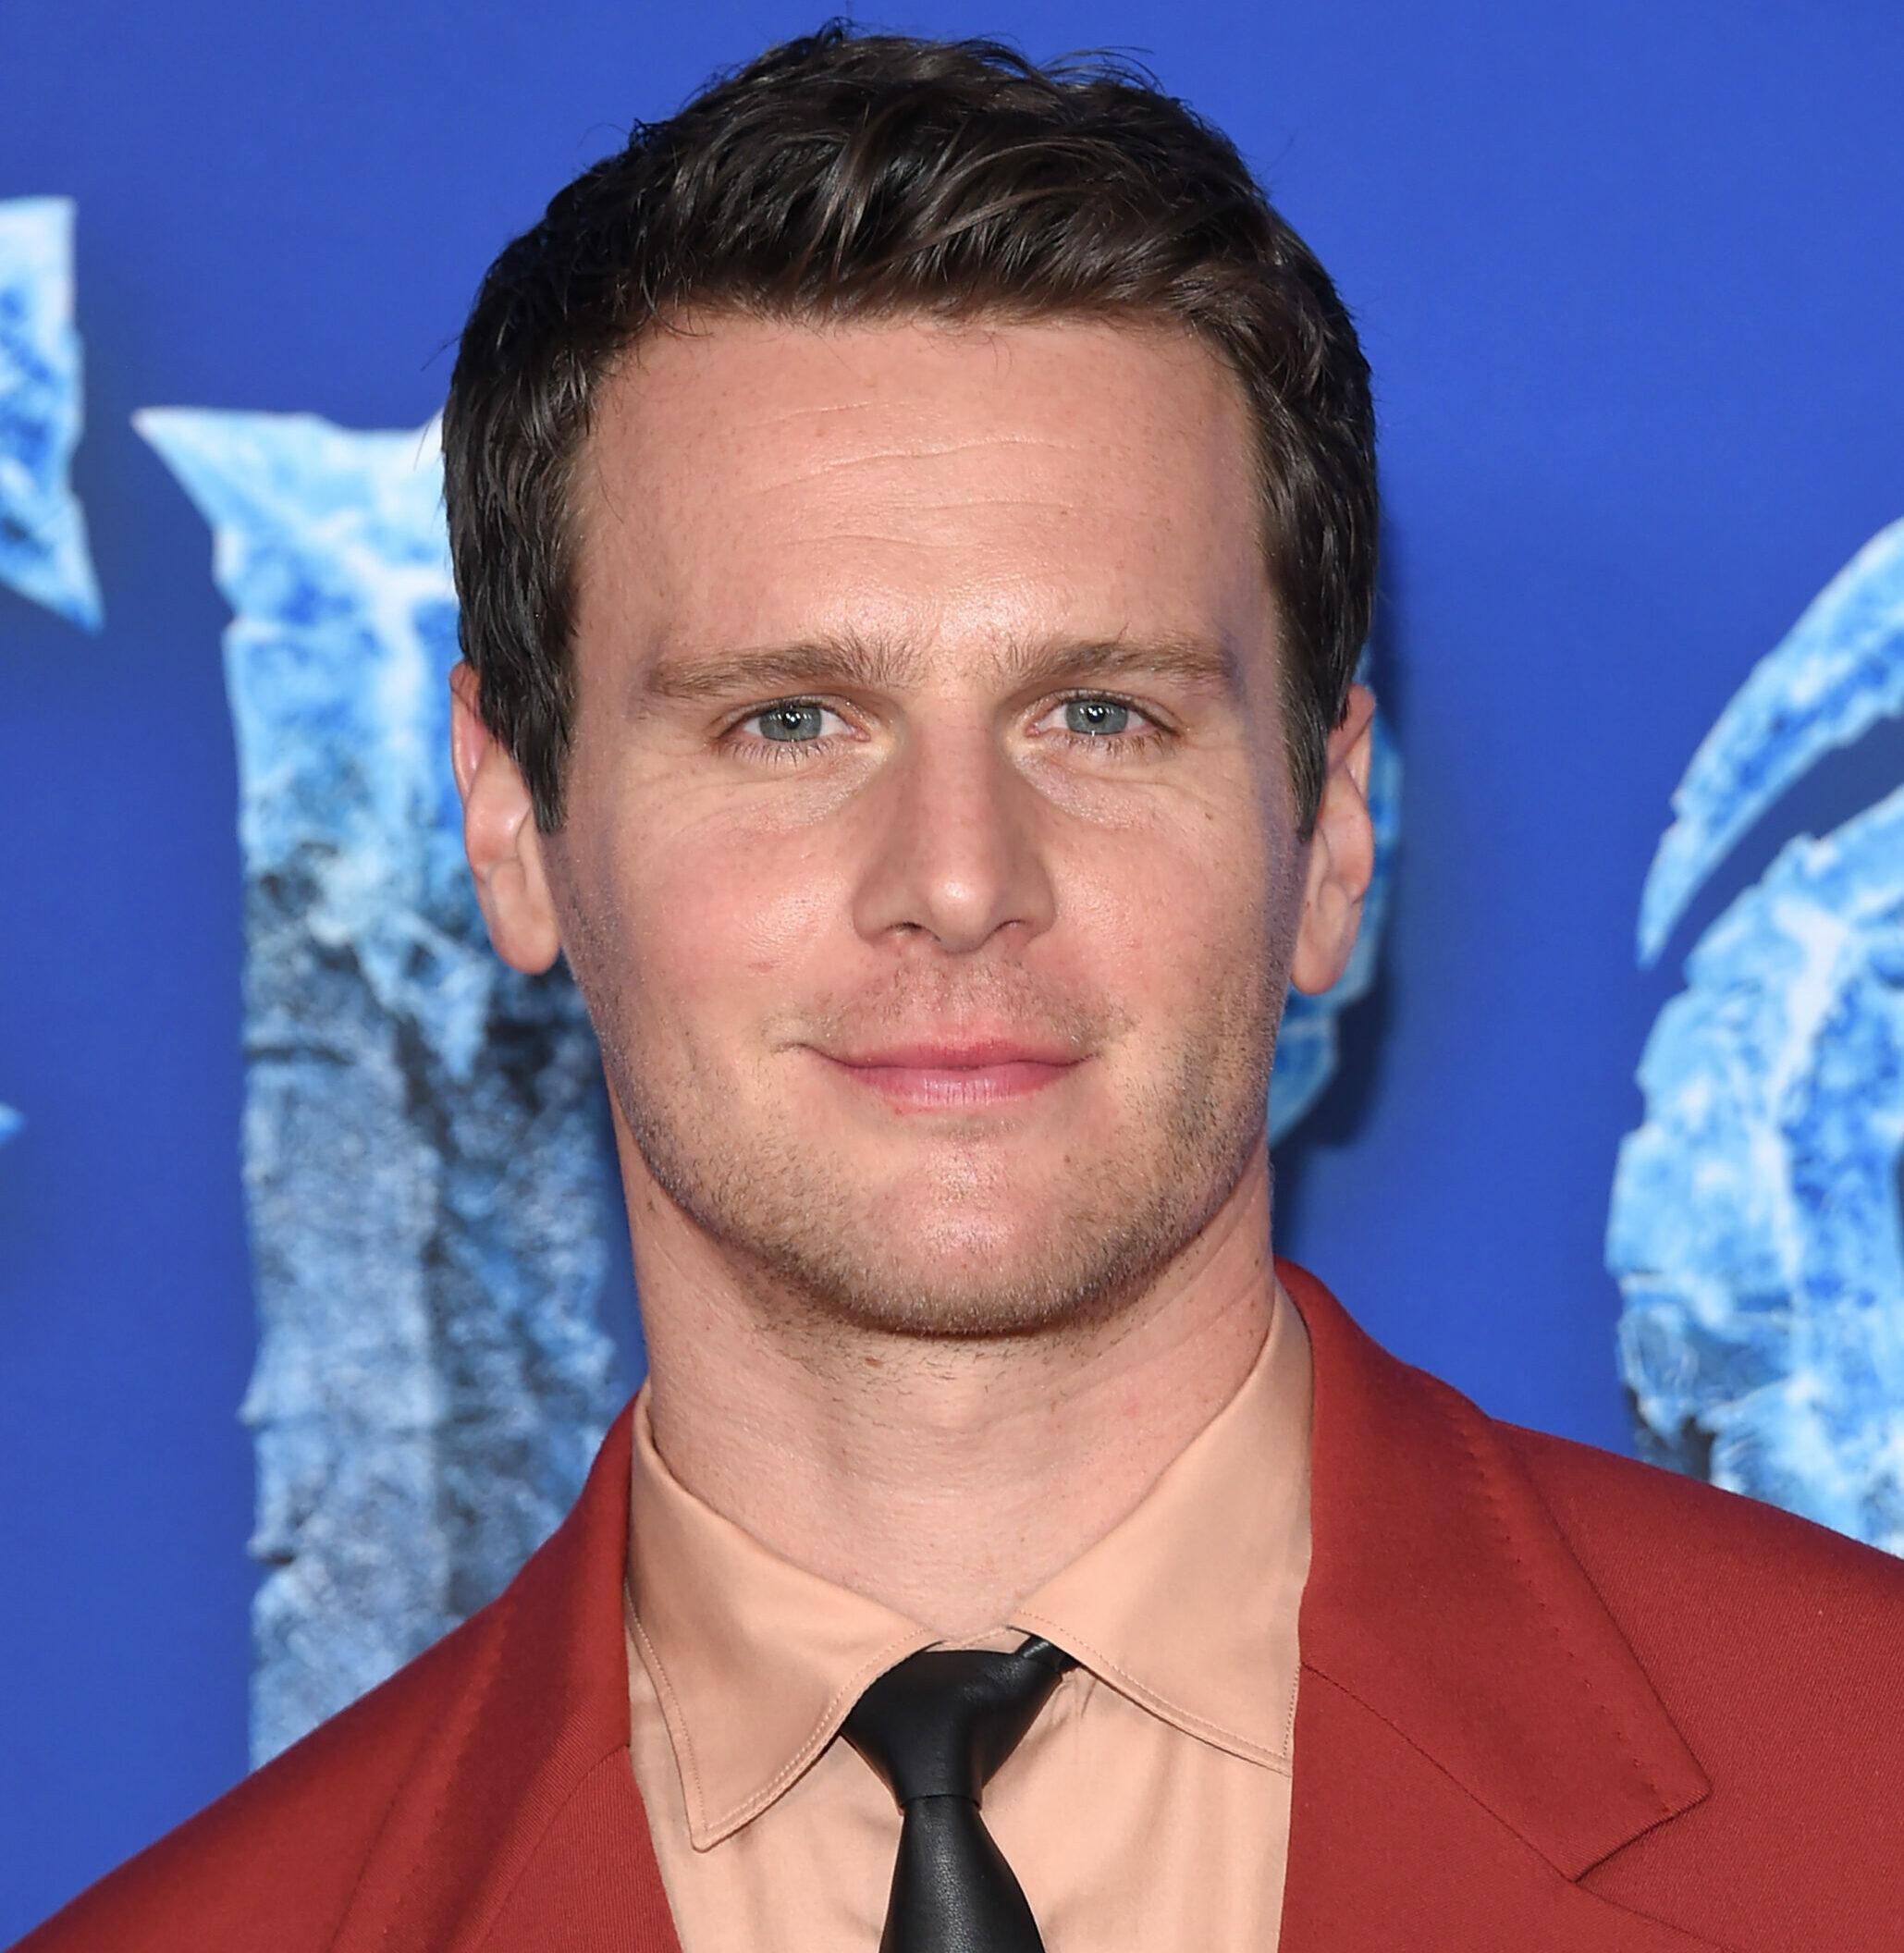 Jonathan Groff at the World premiere of "Frozen 2" held at the Dolby Theatre on November 7, 2019 in Hollywood, CA.